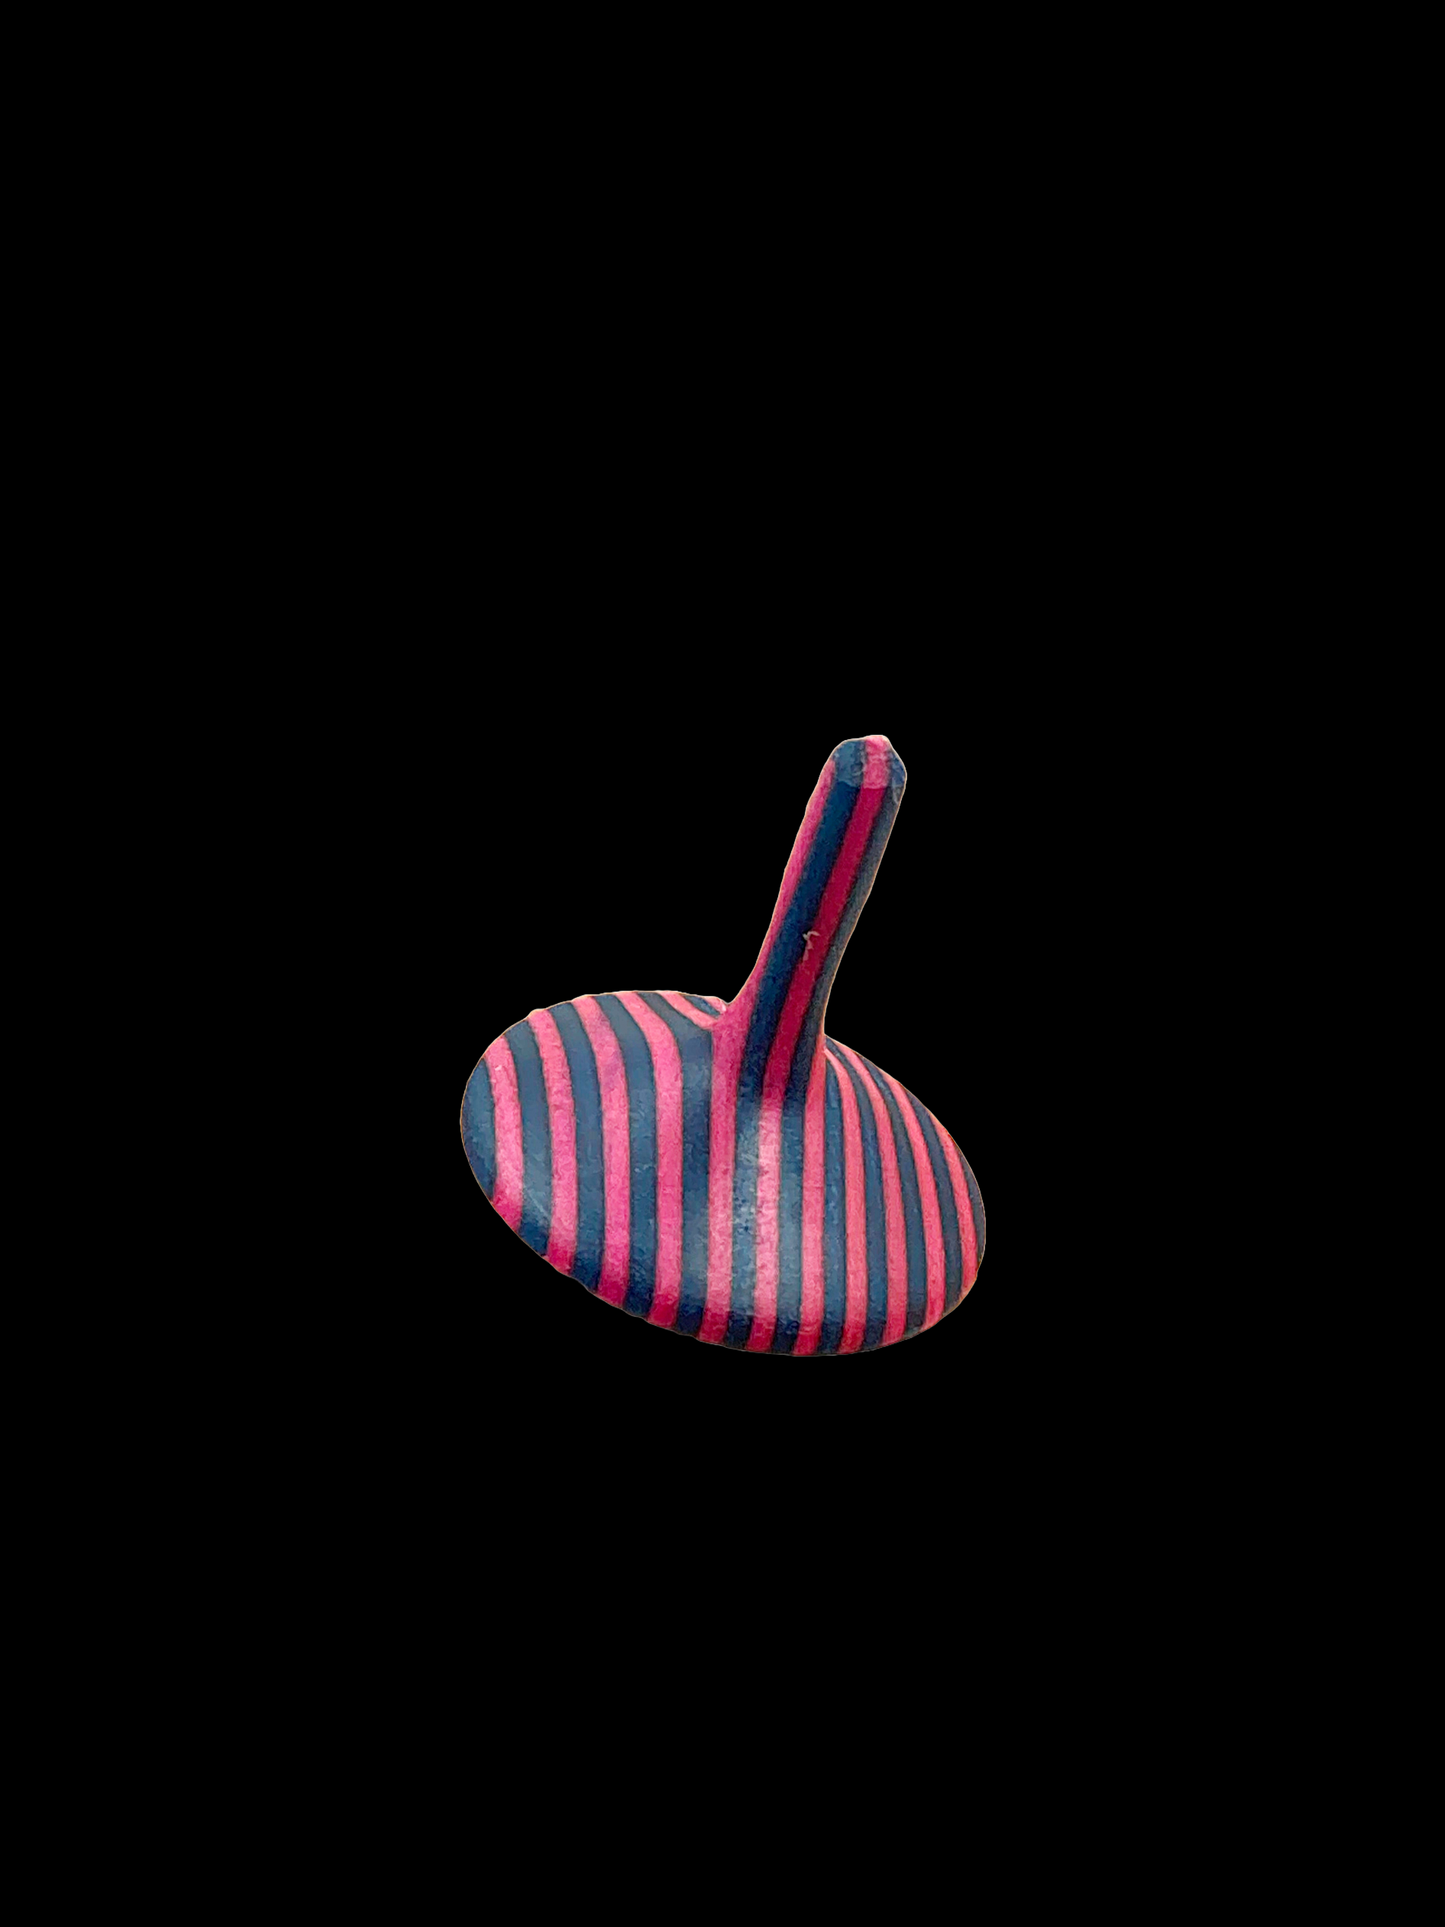 Spectra* spinning tops